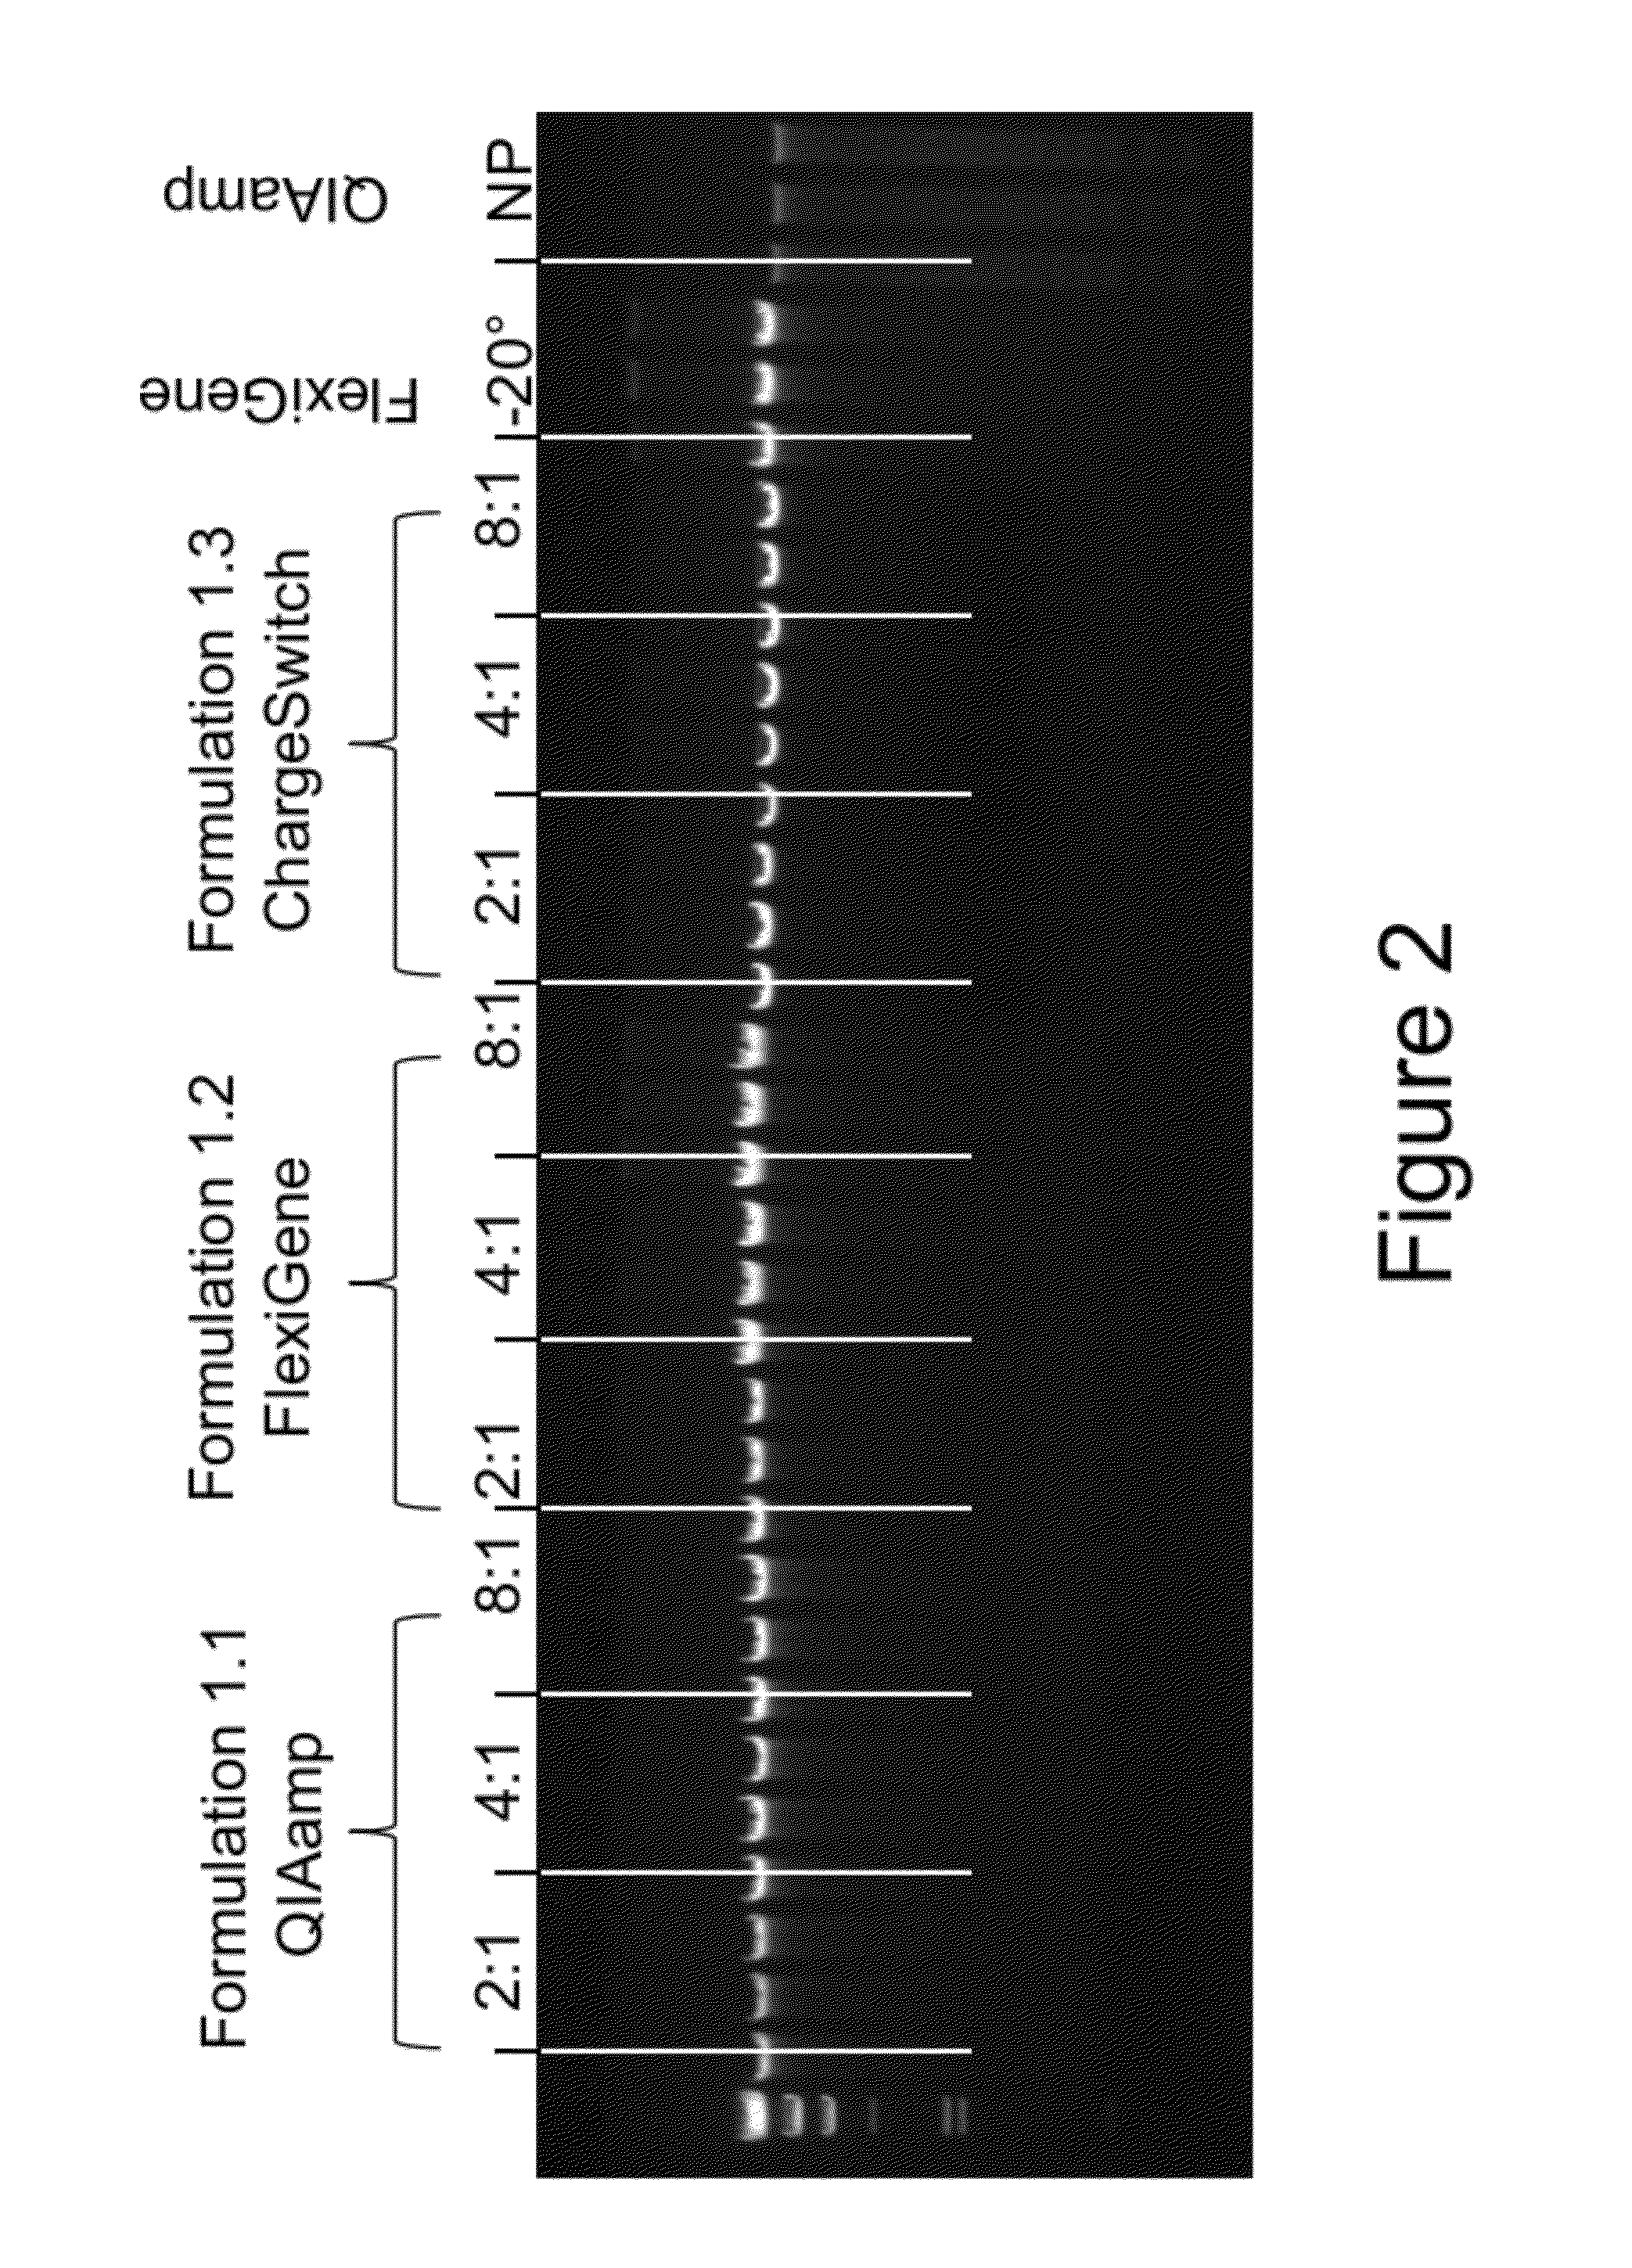 Compositions for stabilizing dna, RNA and proteins in blood and other biological samples during shipping and storage at ambient temperatures